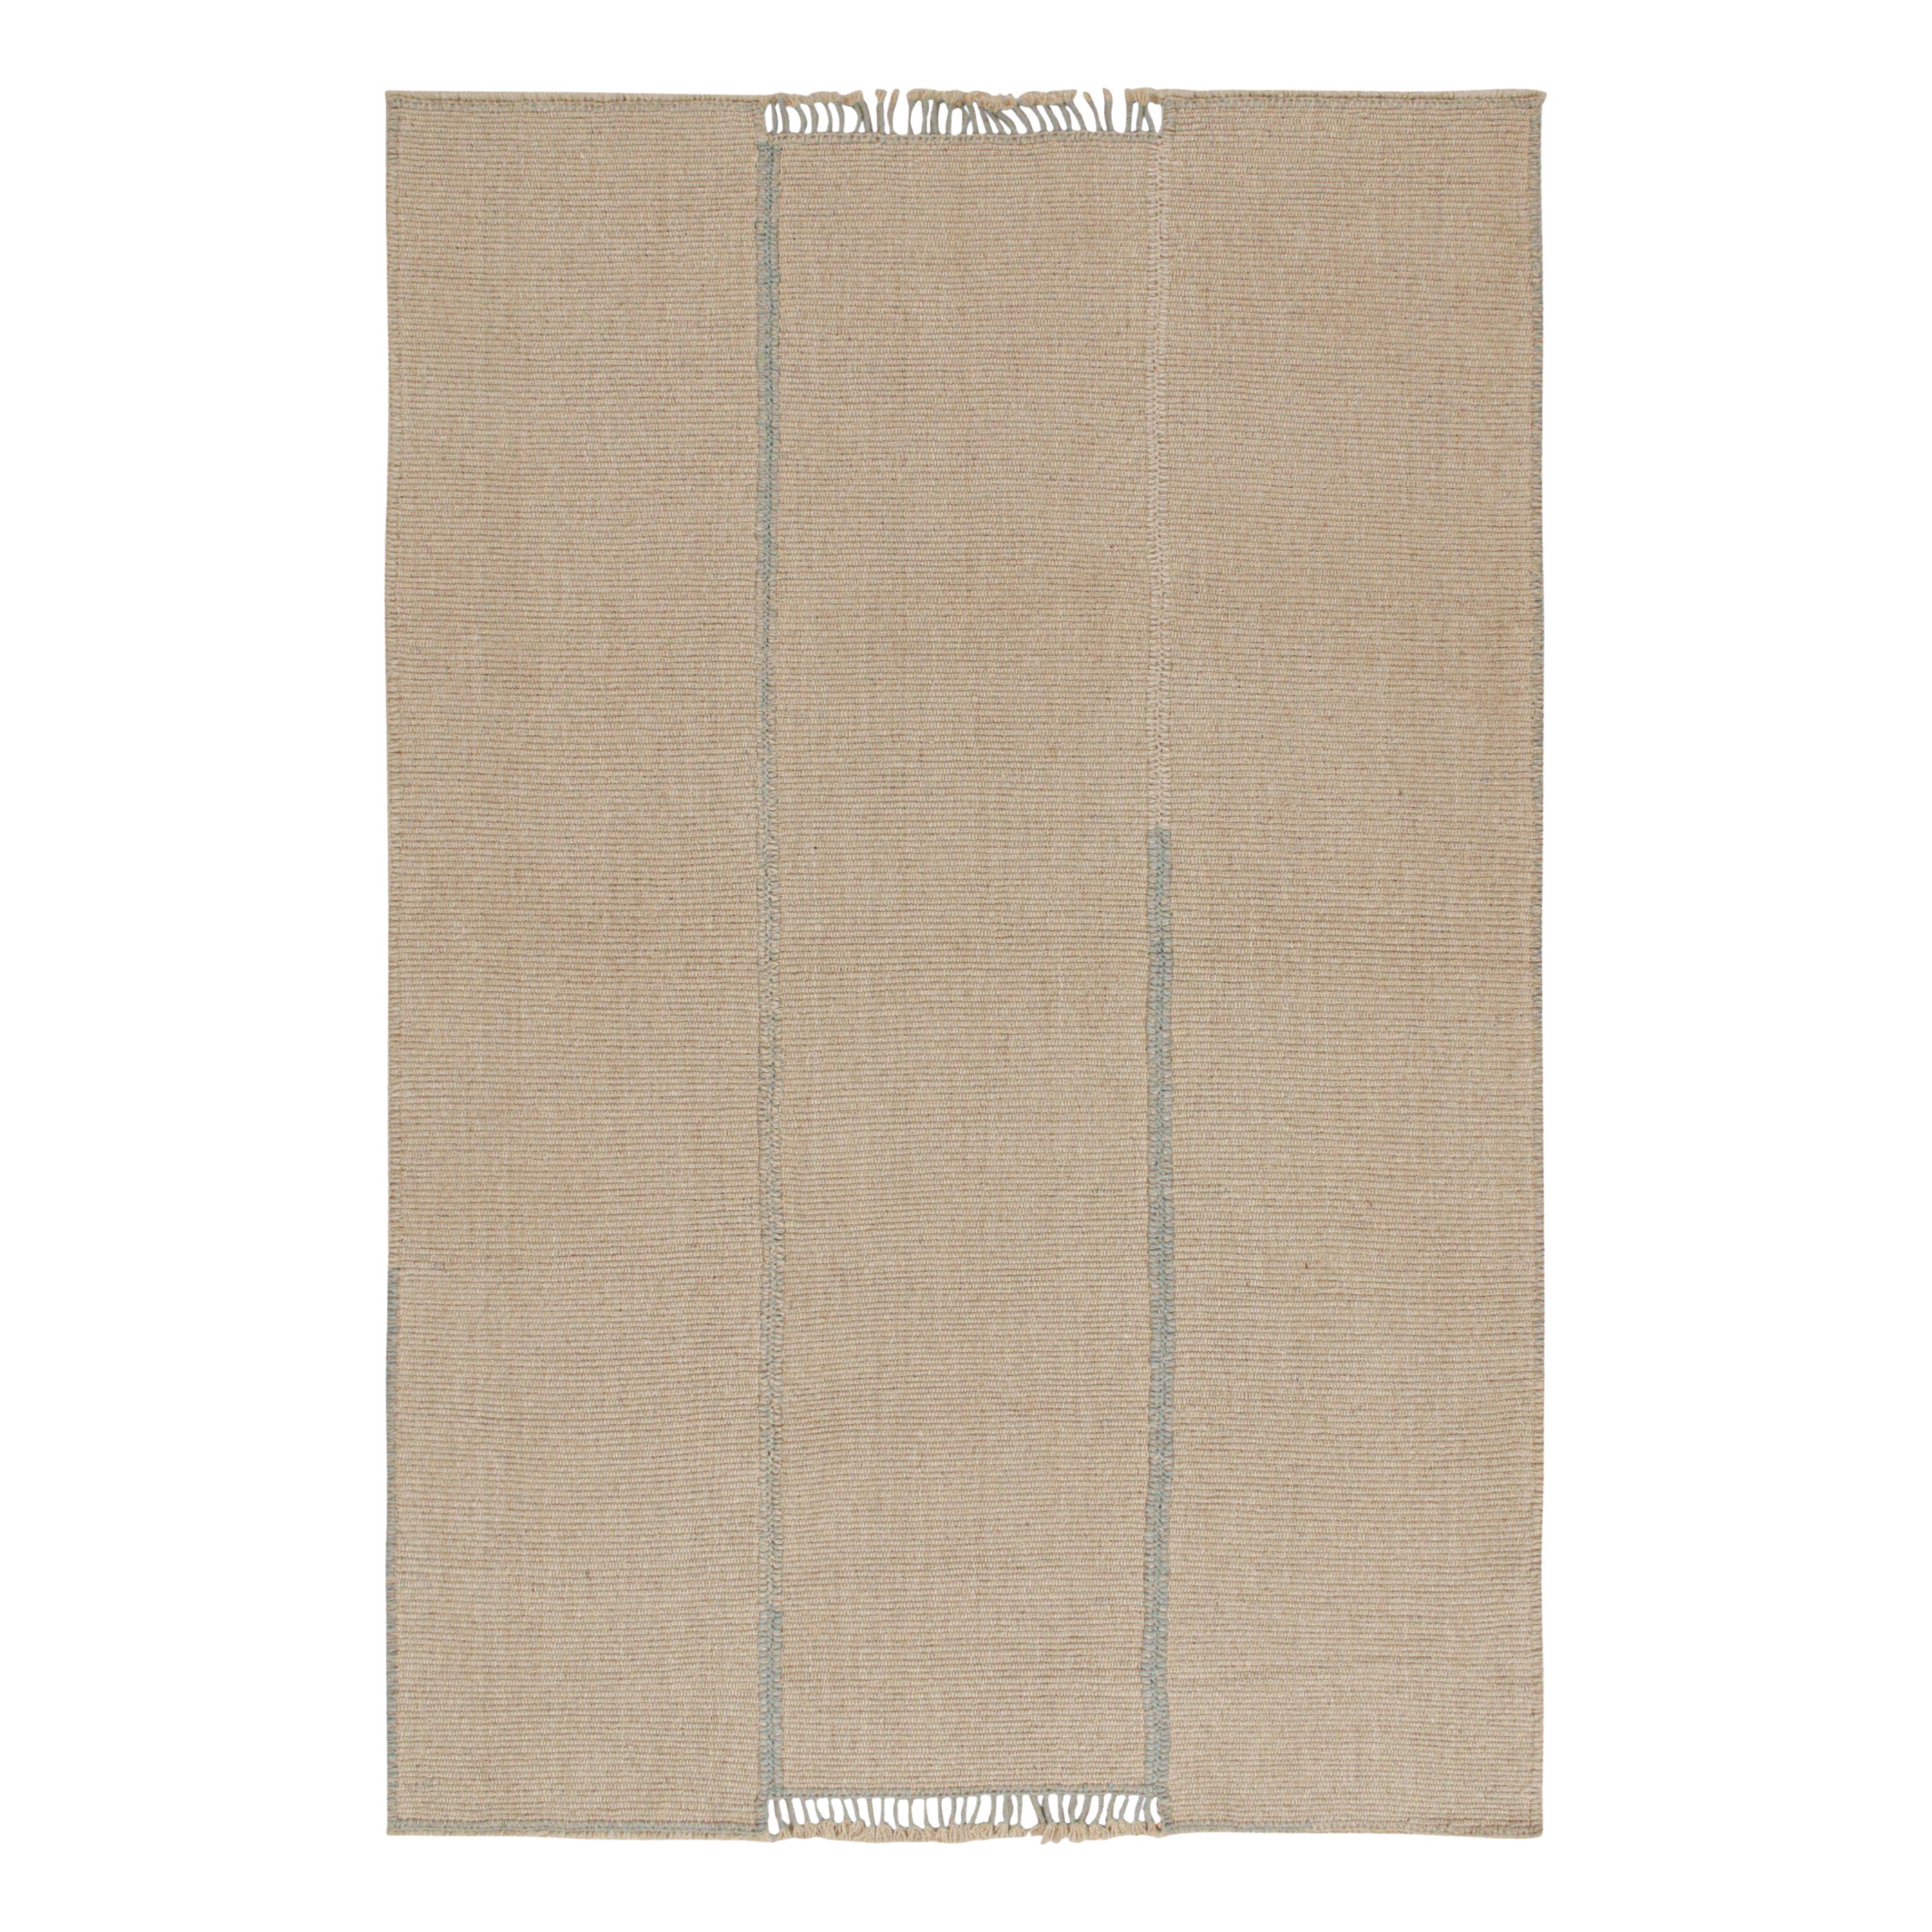 Rug & Kilim’s Contemporary Kilim in Beige, Blue Stripes and Off-White Accents For Sale